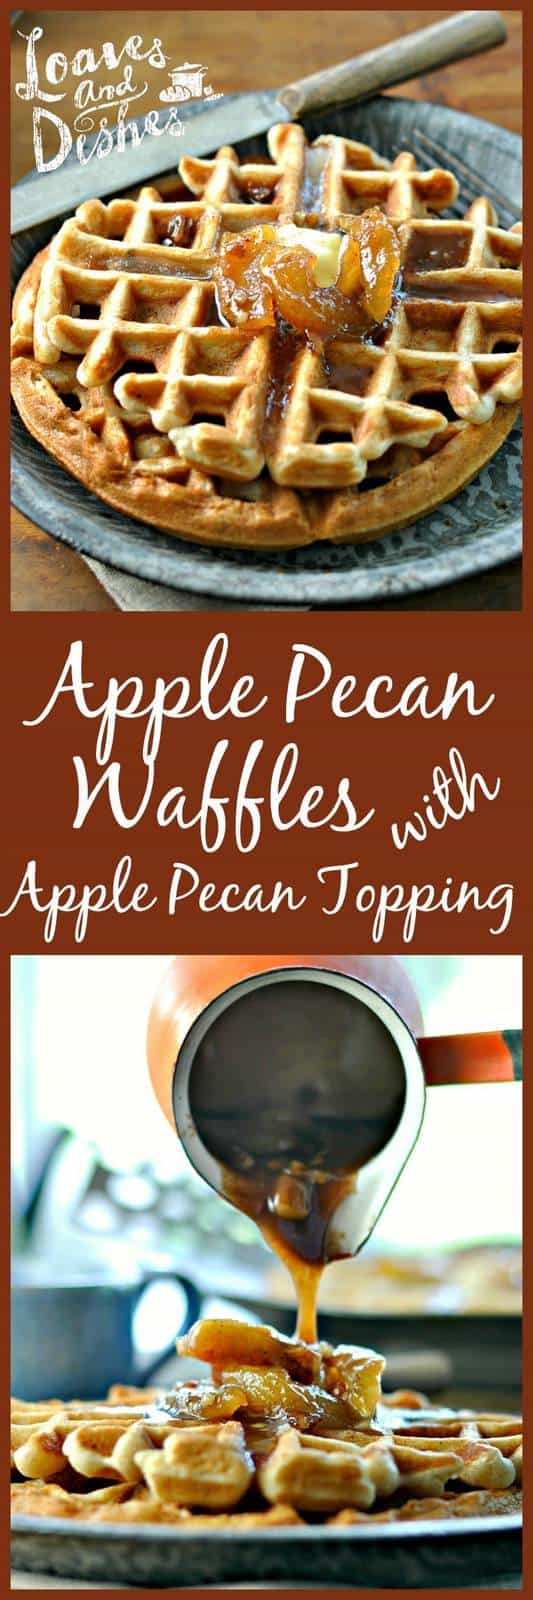 Apple Pecan Waffles with Apple Pecan Topping • Loaves and Dishes